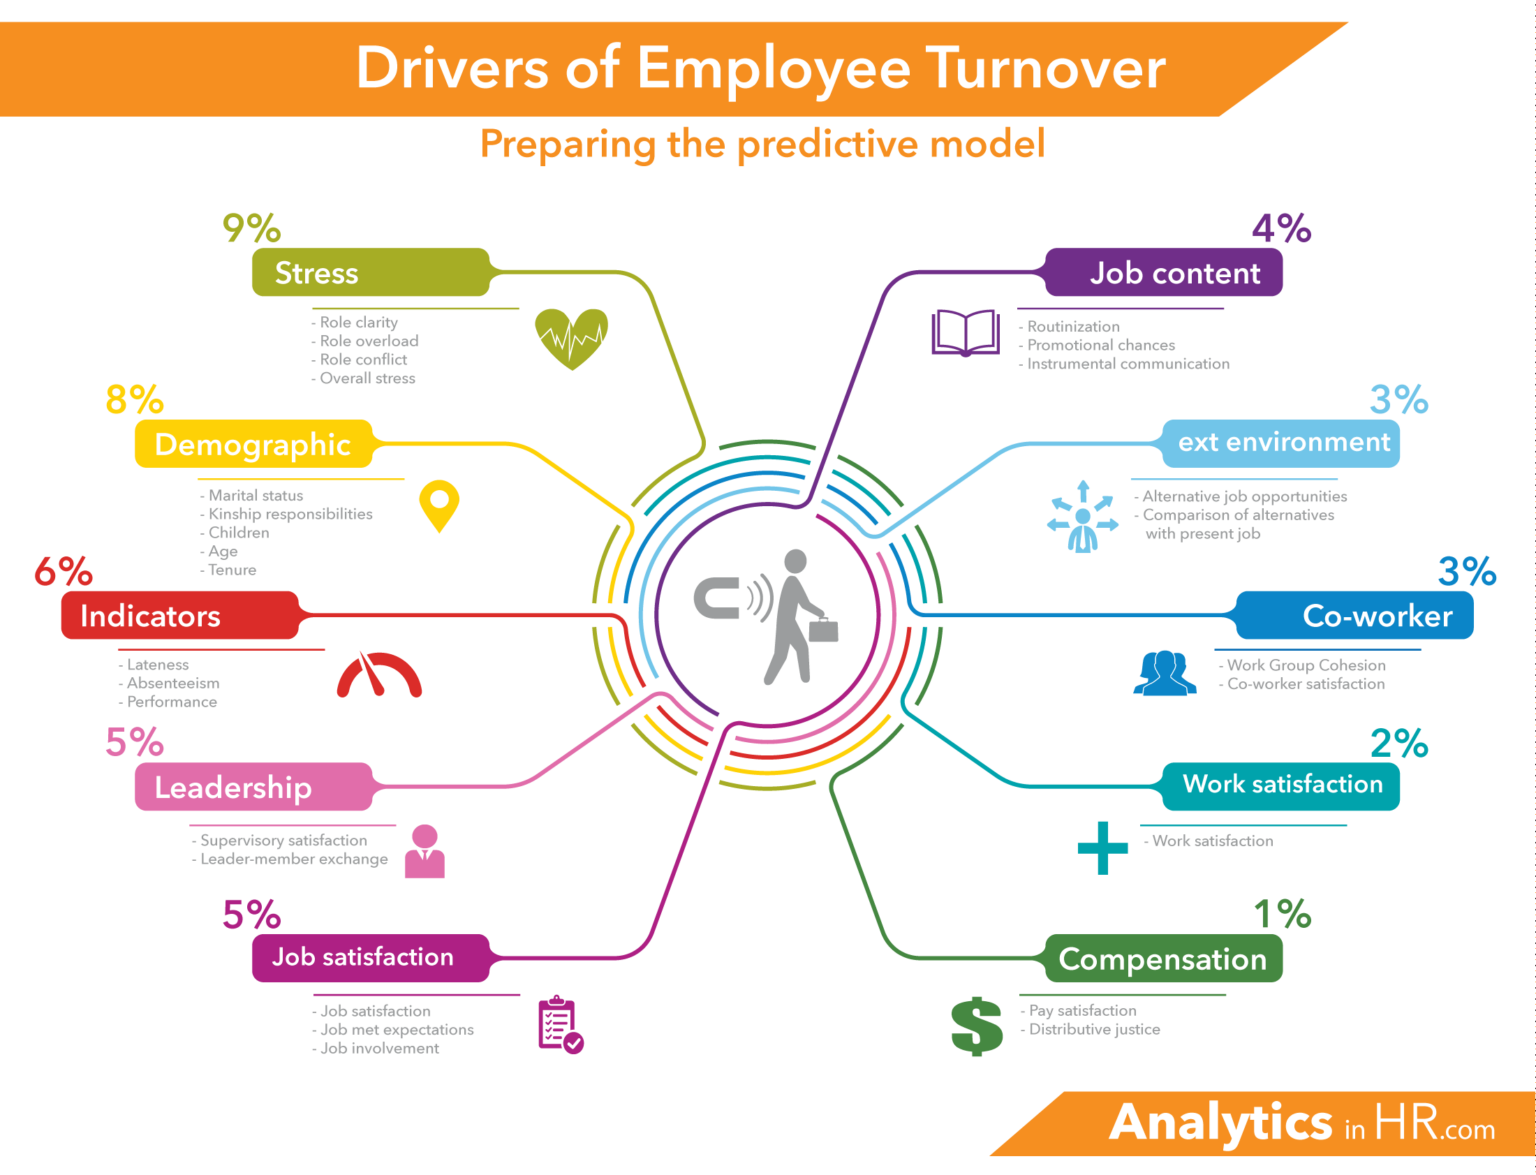 A chart shows the factors affecting employee turnover. The factors are compensation, job satisfaction, leadership, indicators, demographics, job content, external environment, and co-worker.